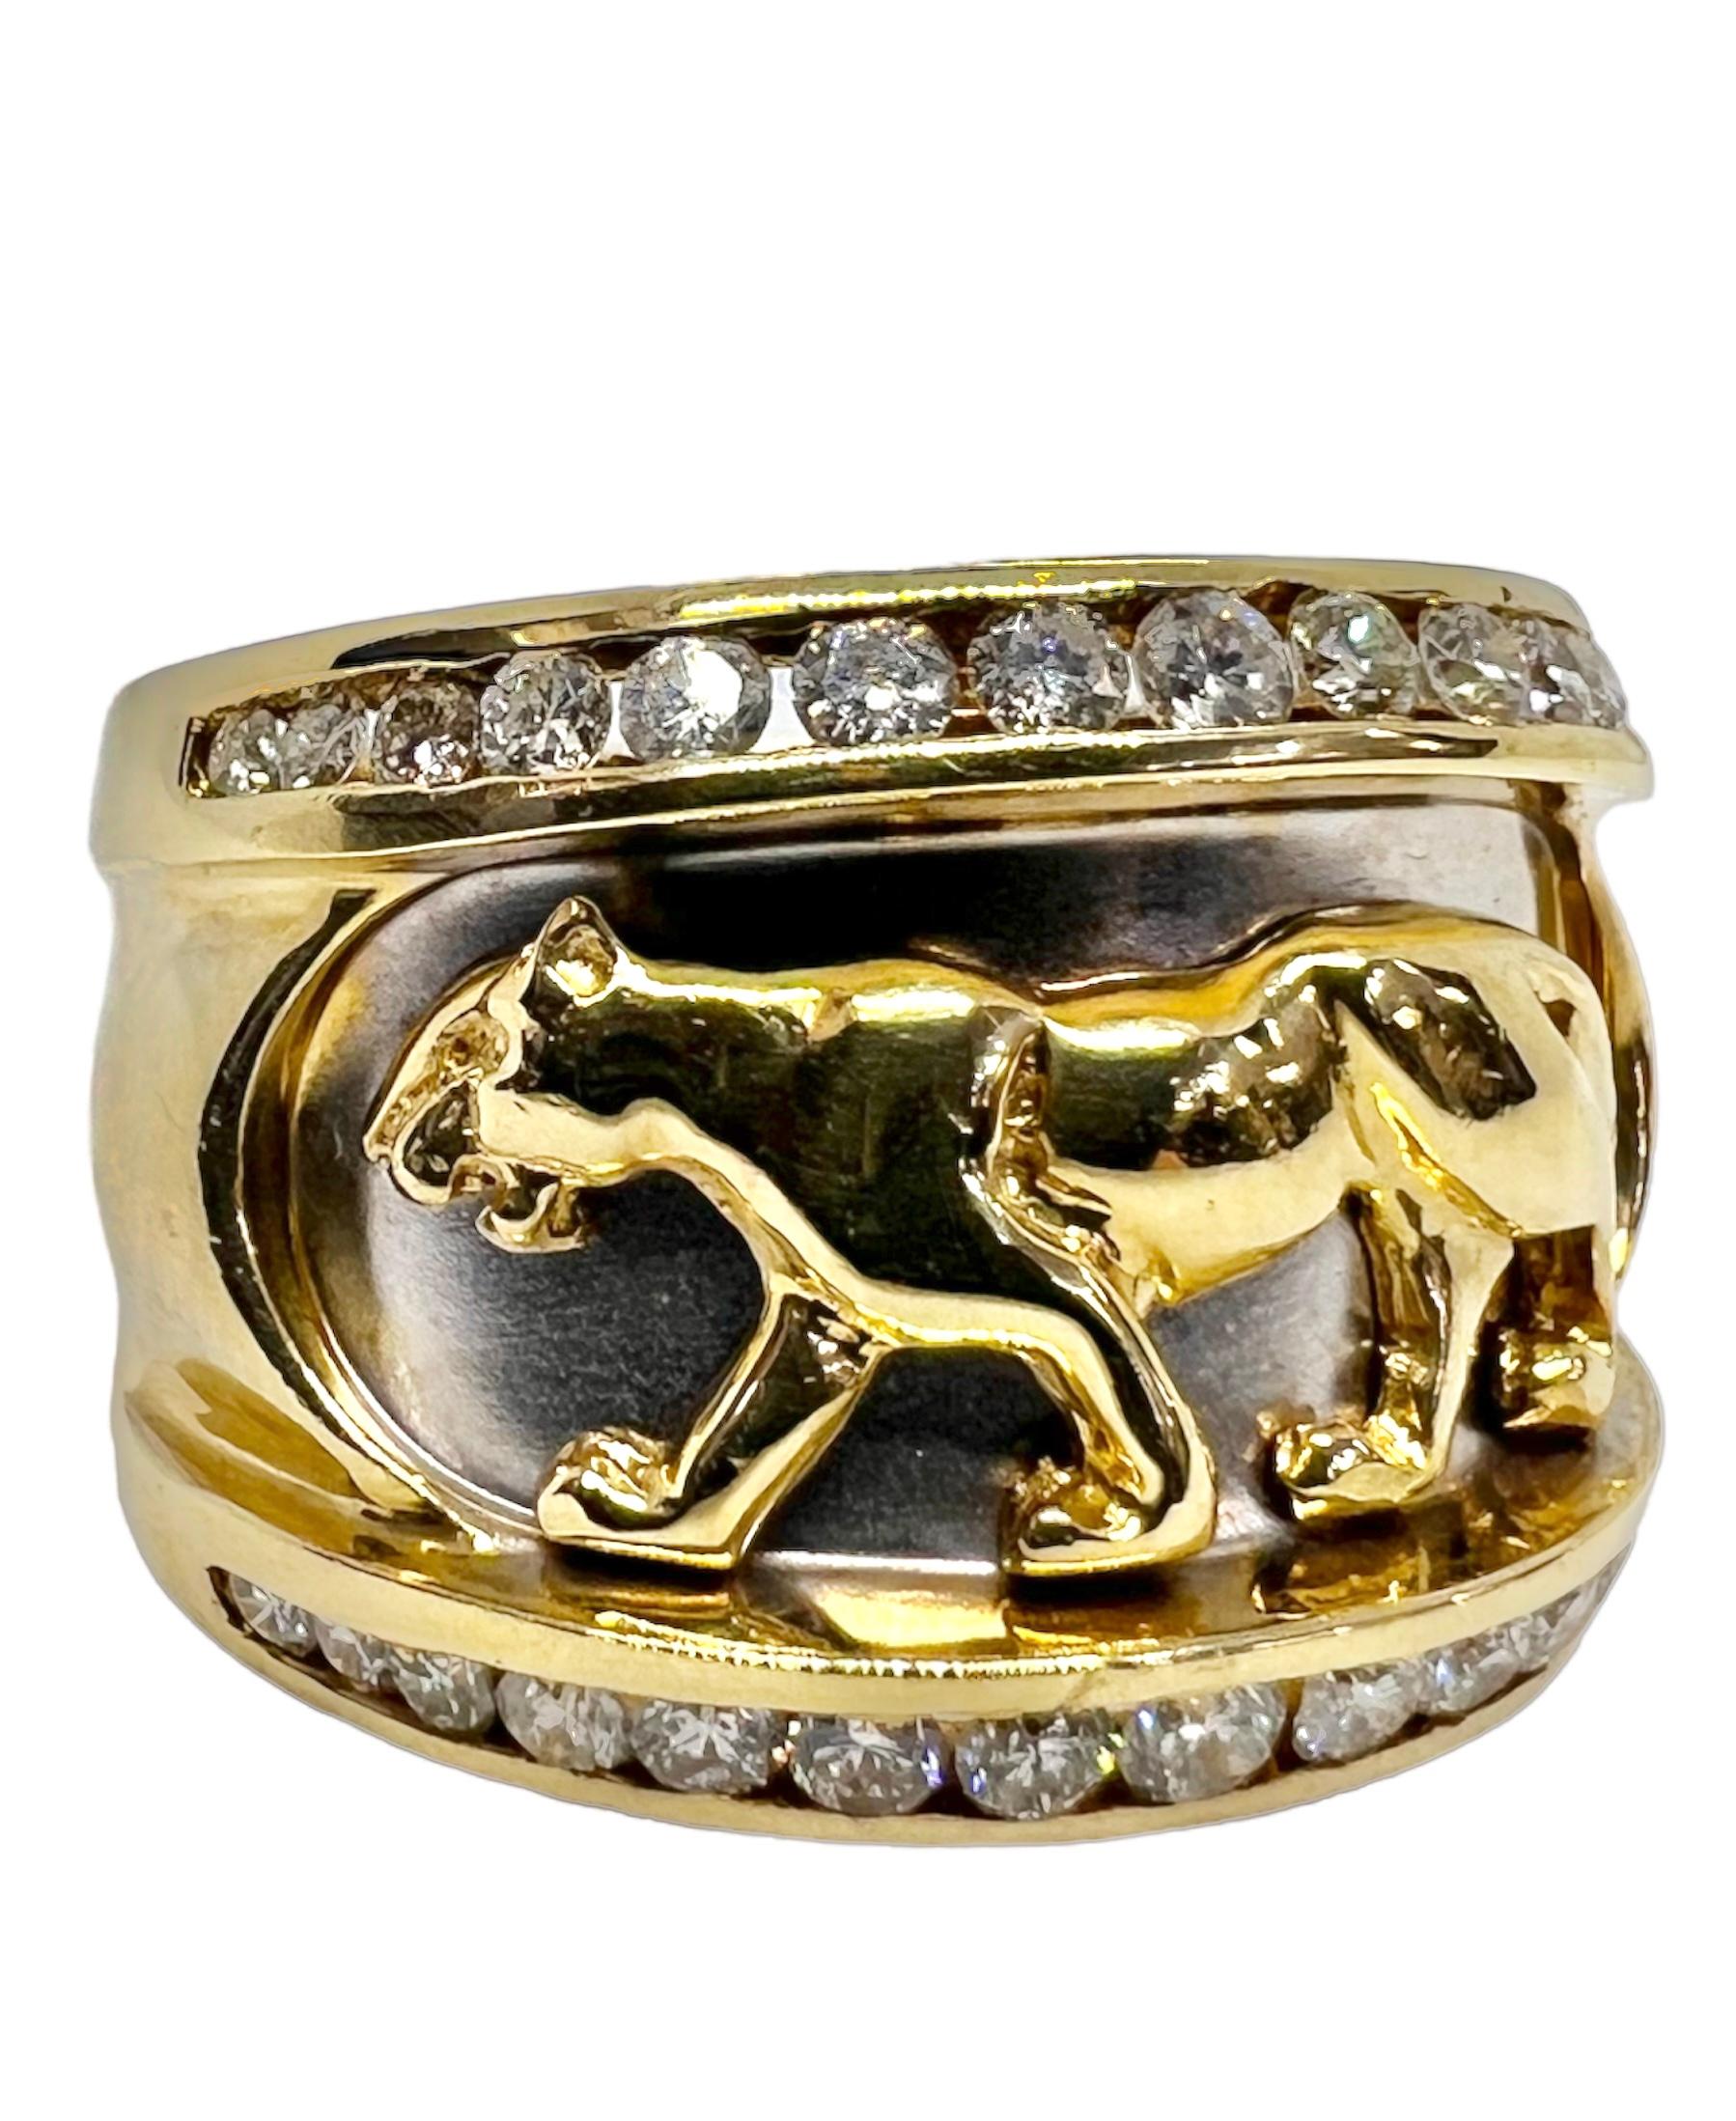 14K yellow gold ring with carved tiger and small round diamonds.

Sophia D by Joseph Dardashti LTD has been known worldwide for 35 years and are inspired by classic Art Deco design that merges with modern manufacturing techniques. 